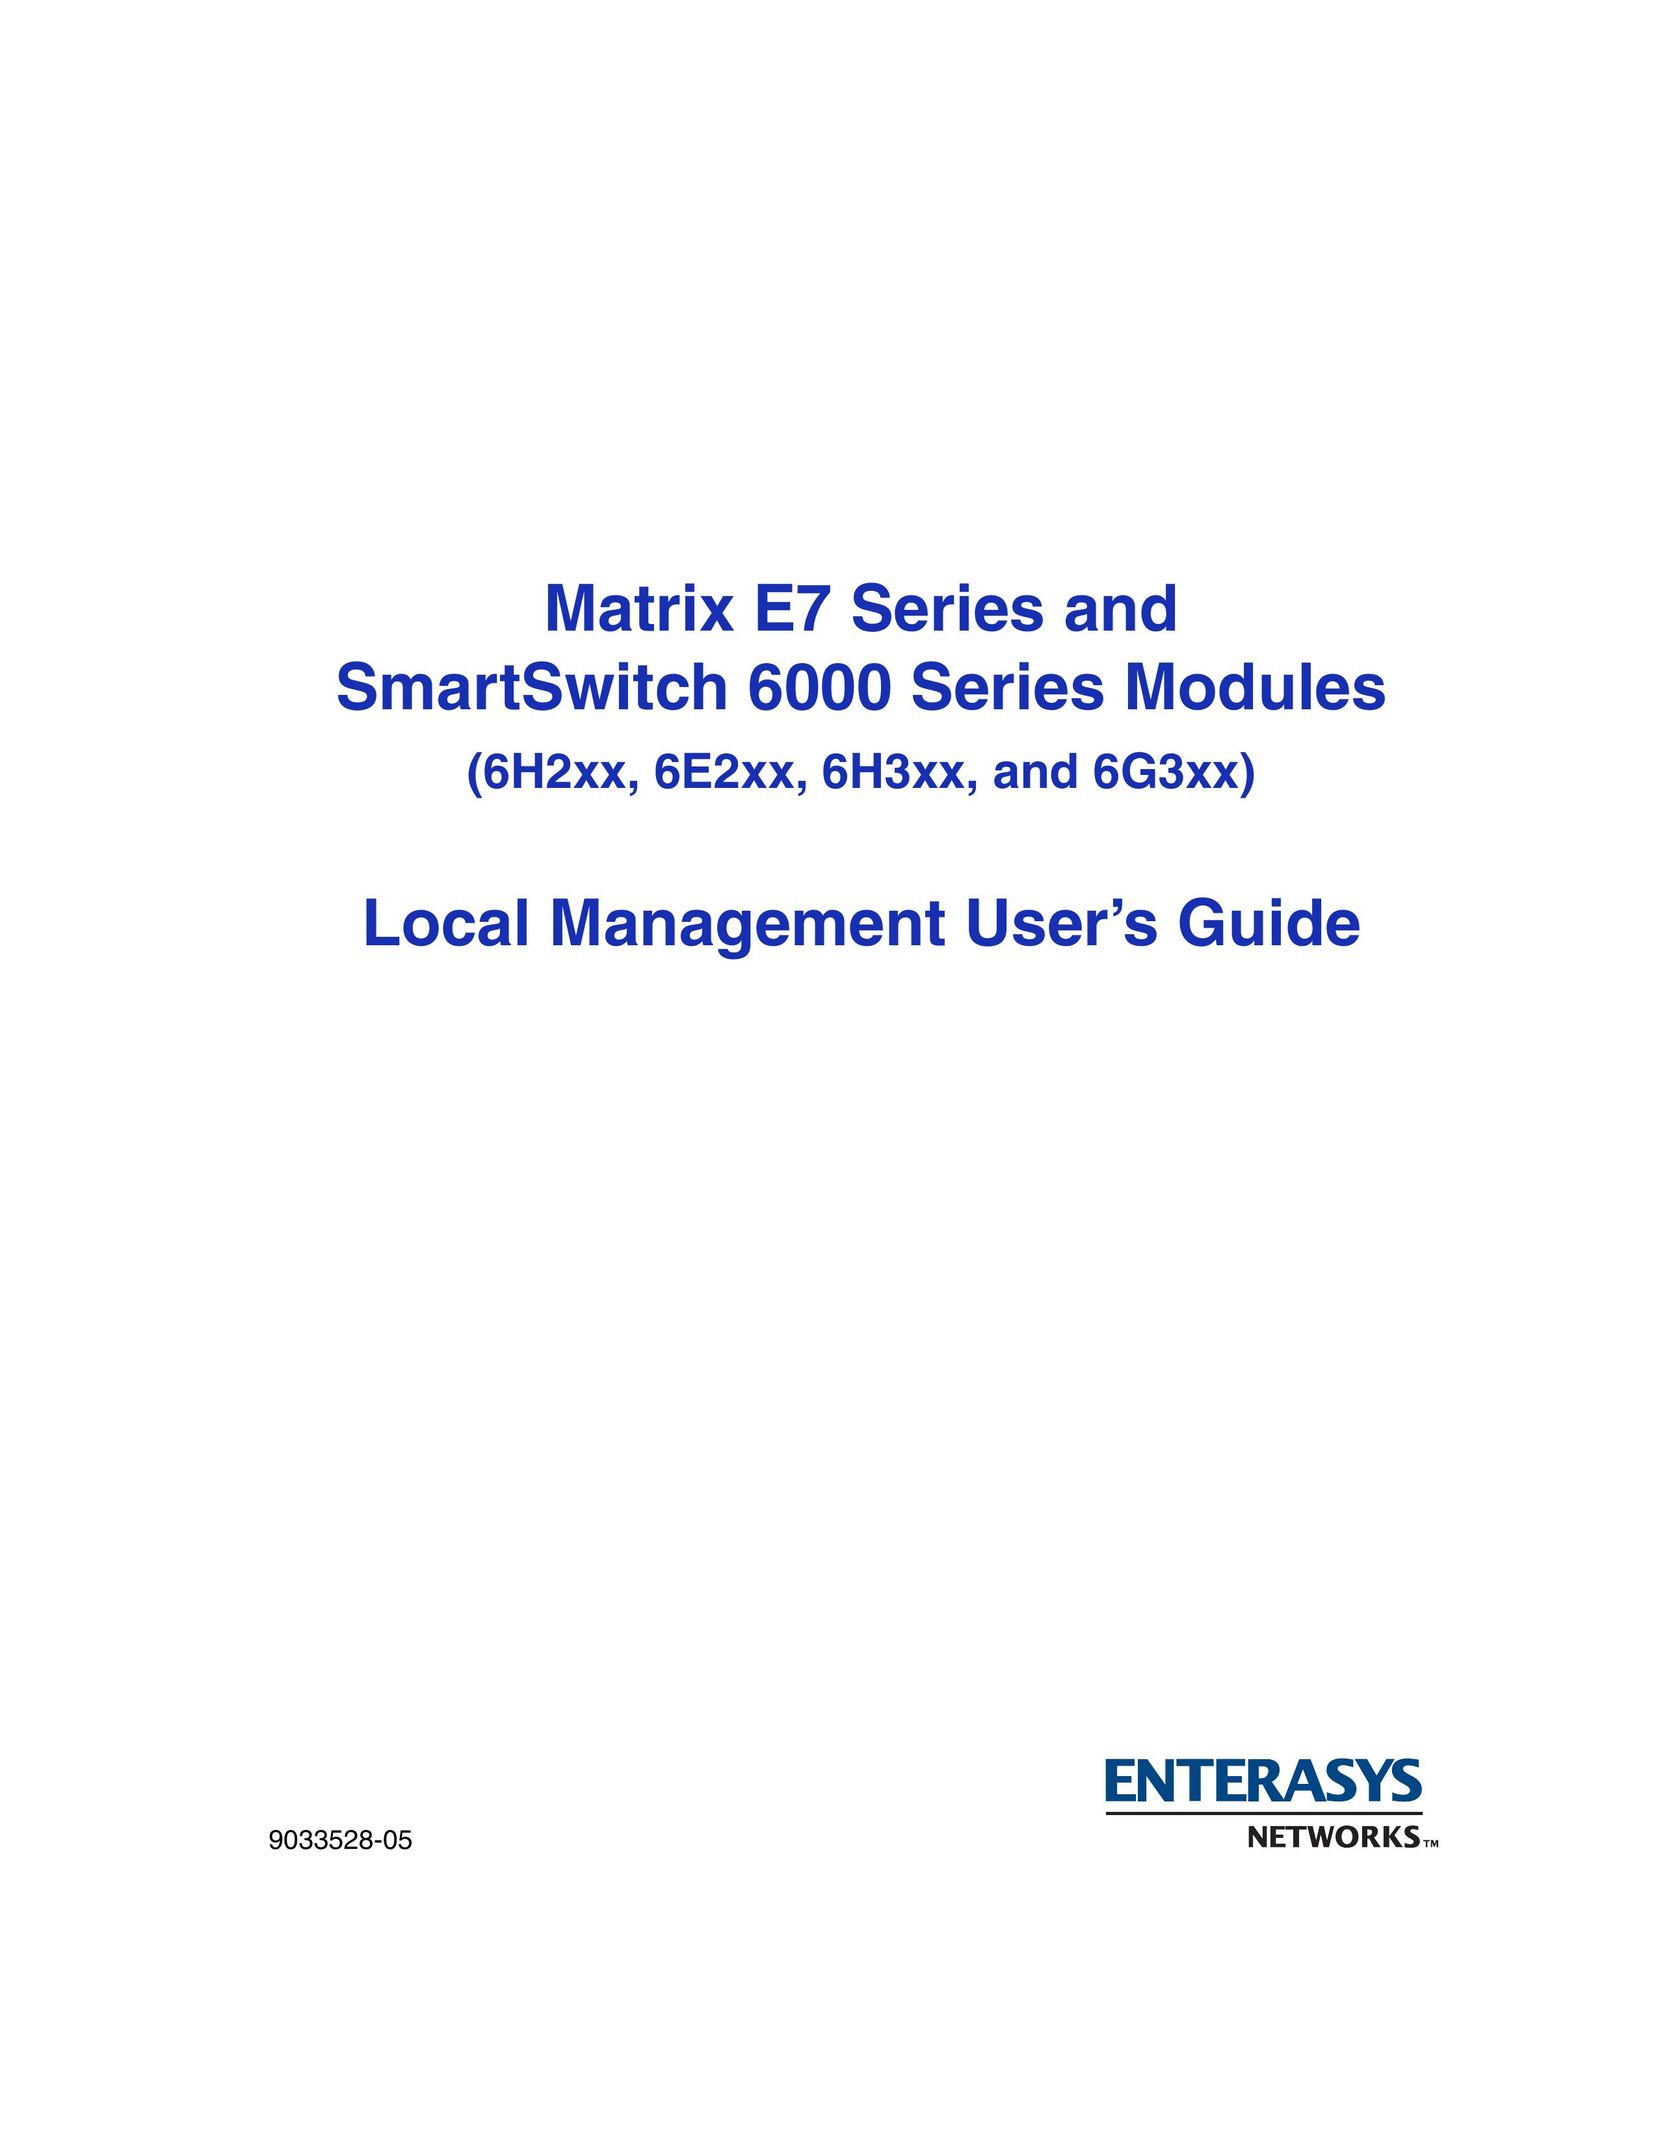 Enterasys Networks 6H2xx Switch User Manual